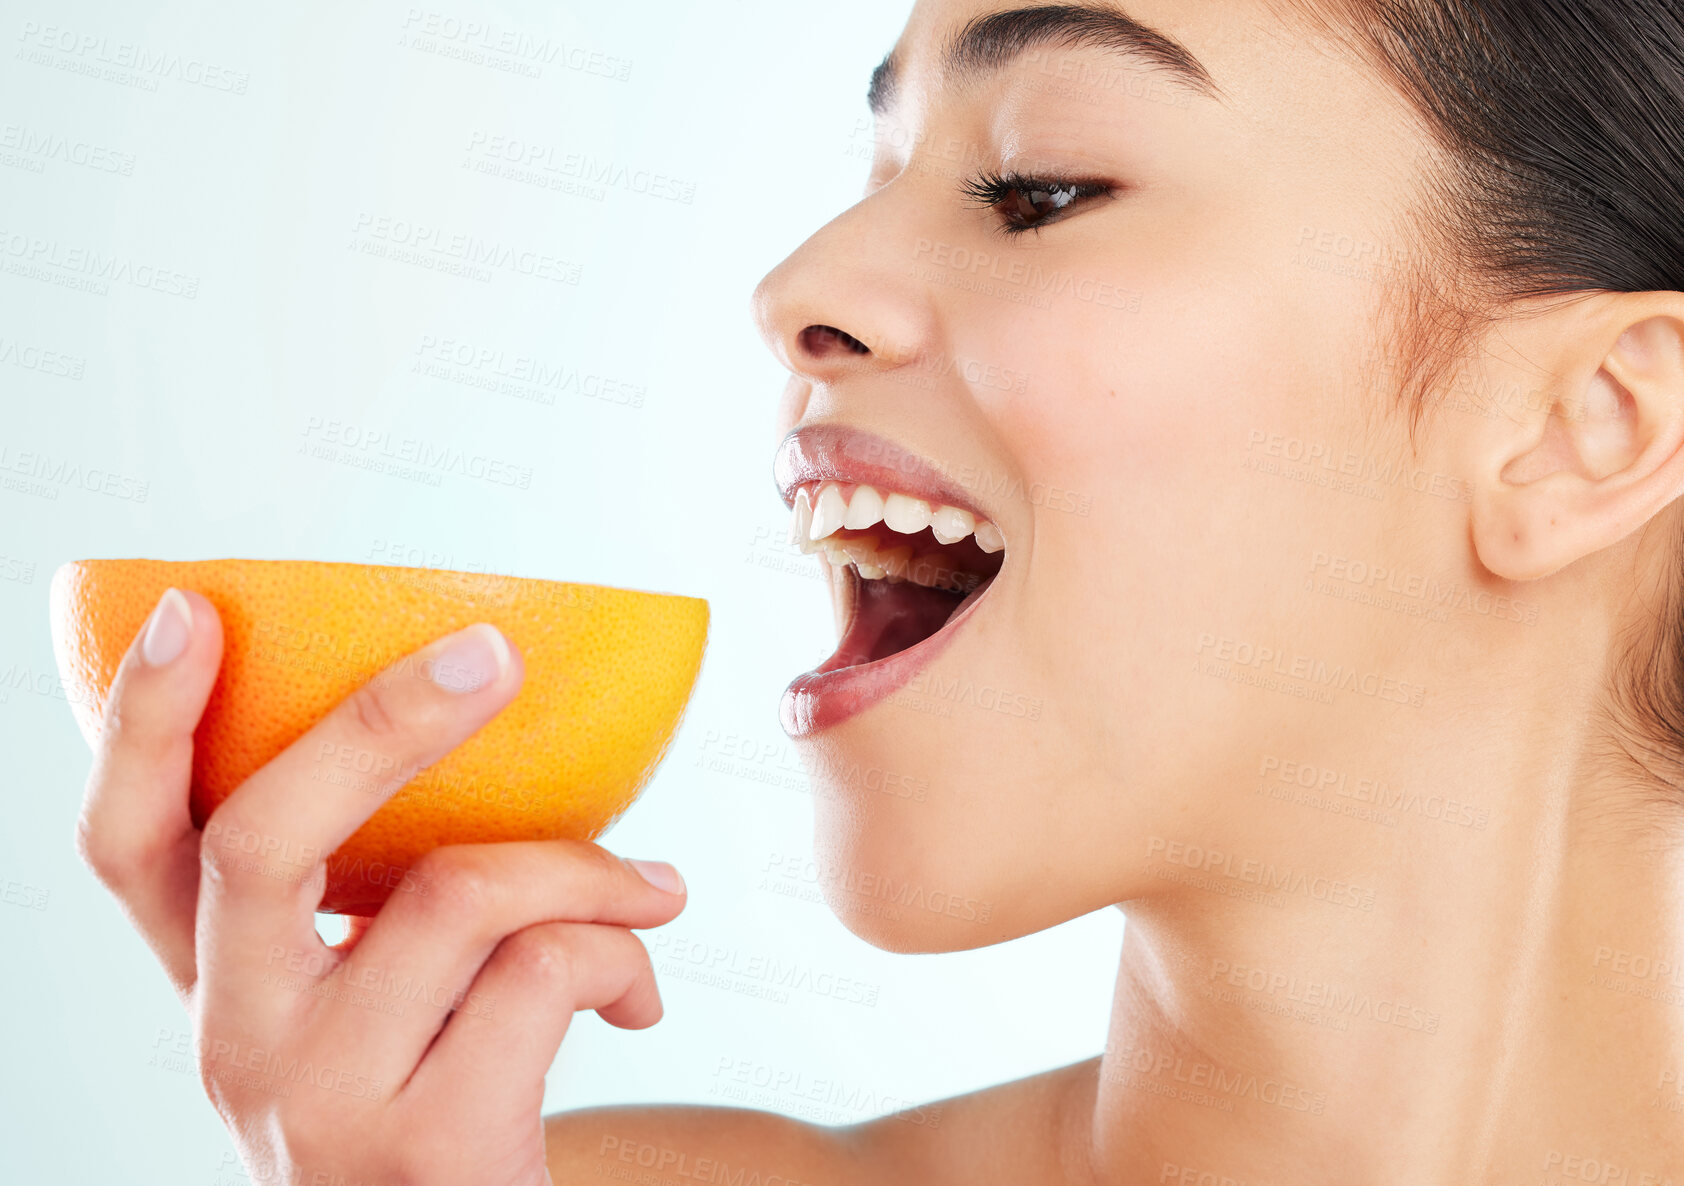 Buy stock photo Studio shot of an attractive young woman biting into an orange against a light background